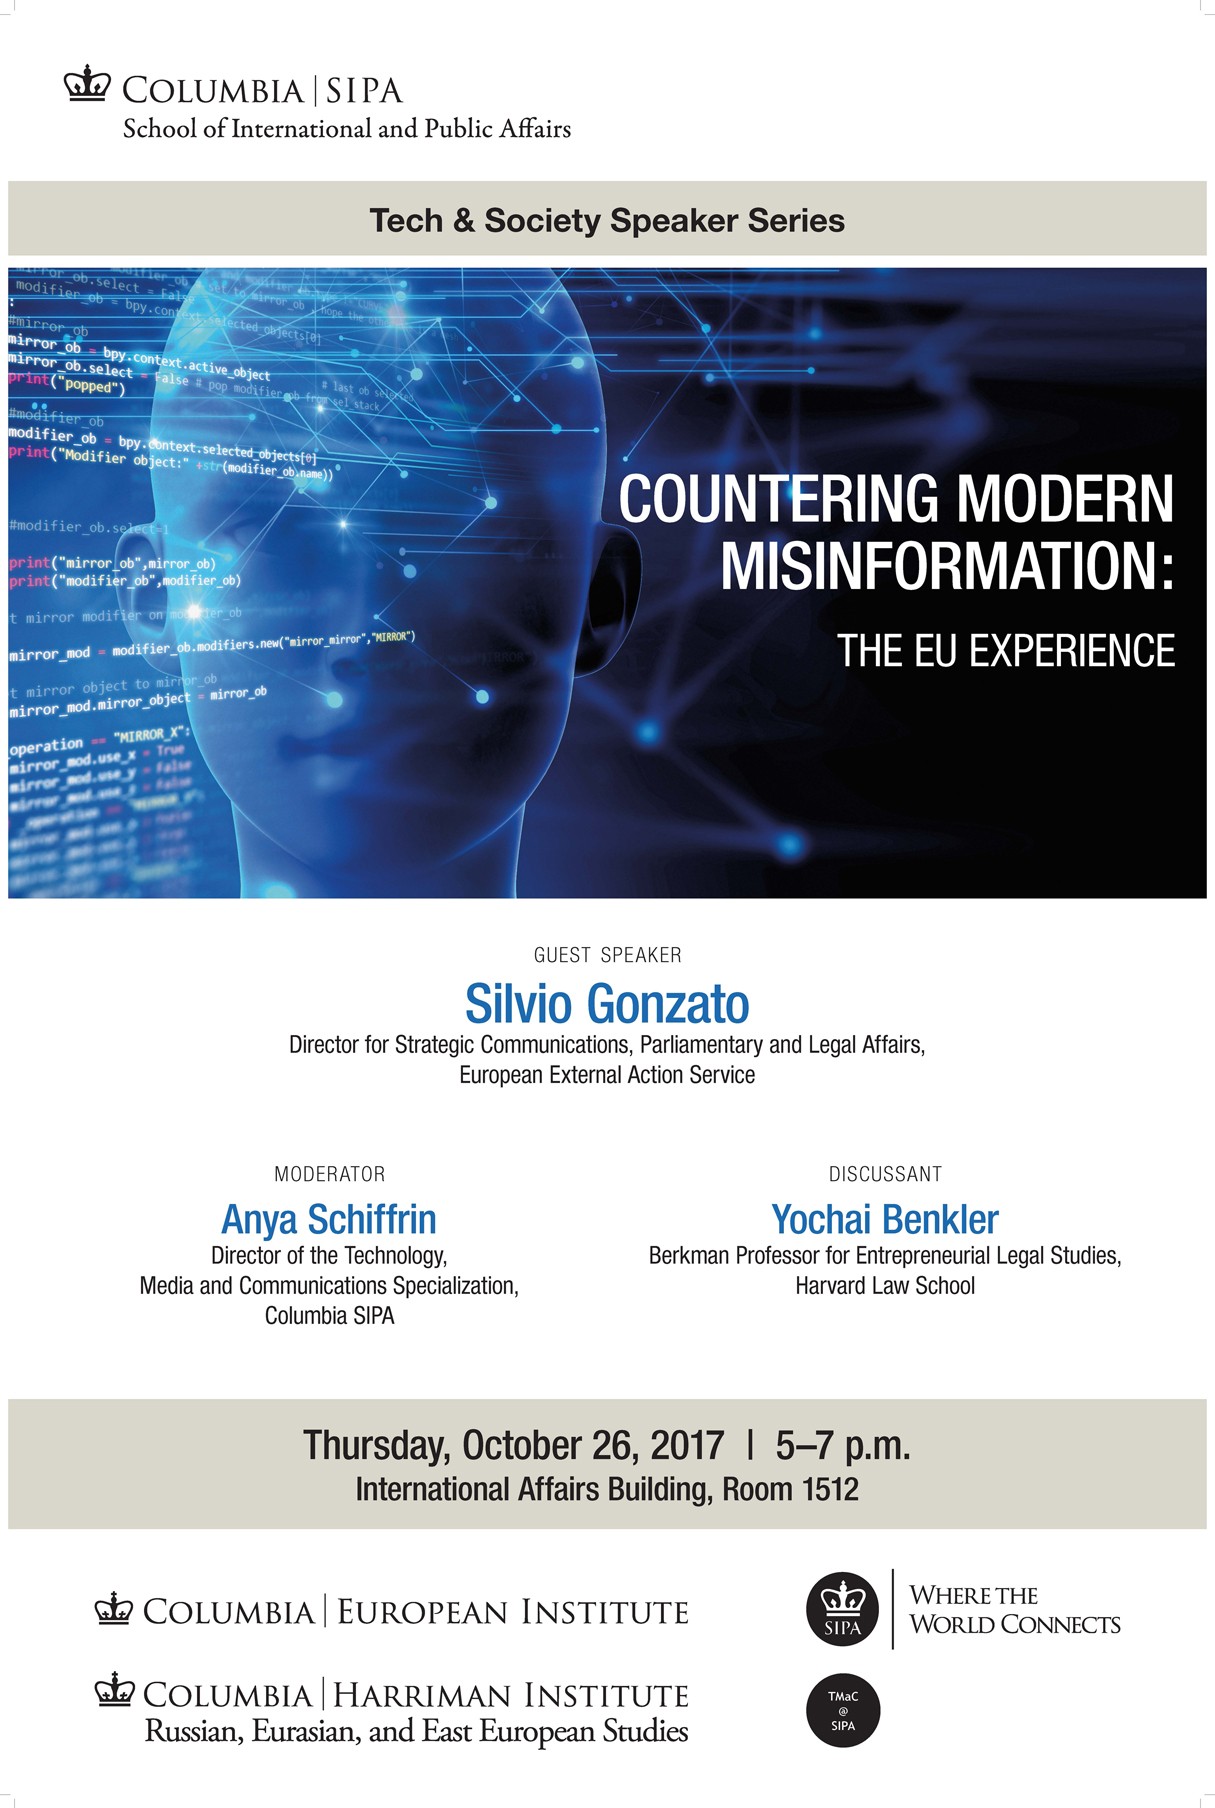 Flyer for the Countering Modern Misinformation: The EU Experience, featuring a image of human brain and data